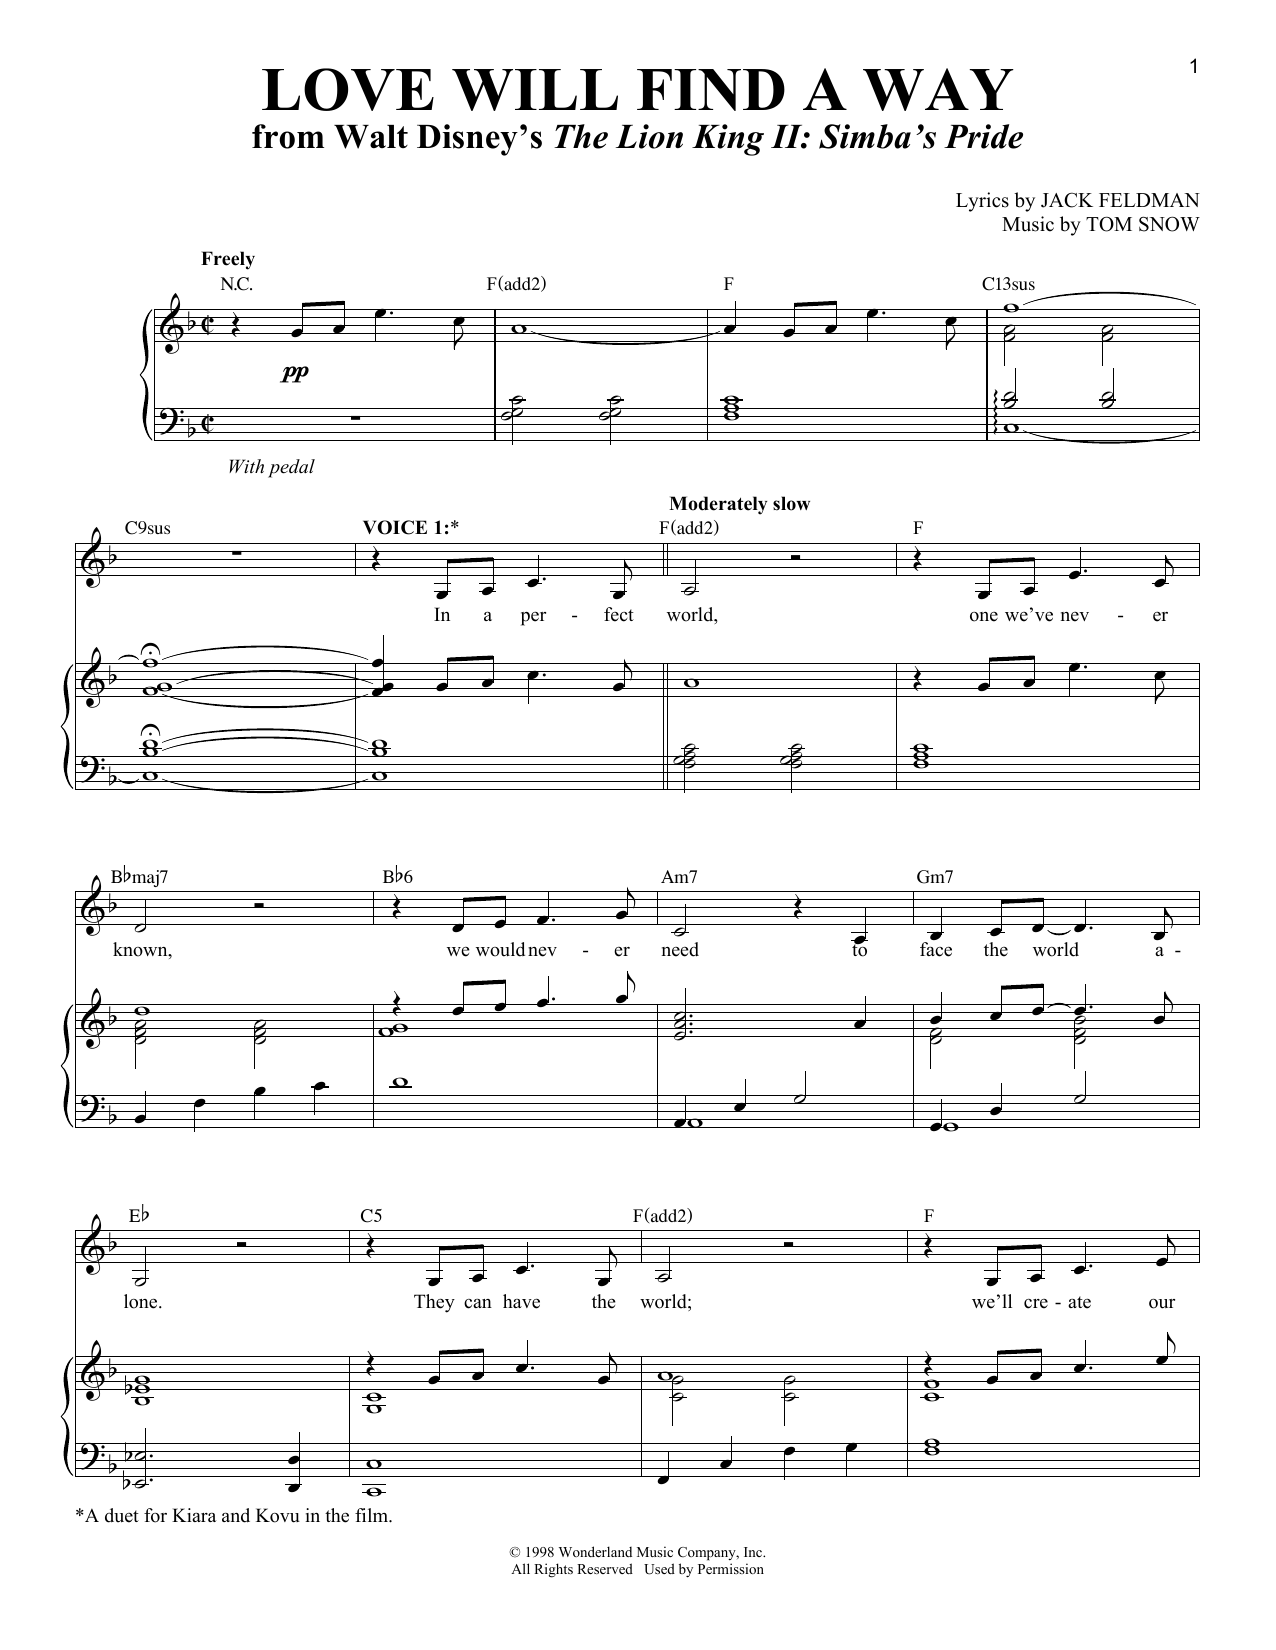 Liz Callaway & Gene Miller Love Will Find A Way (from The Lion King II: Simba's Pride) sheet music notes and chords. Download Printable PDF.